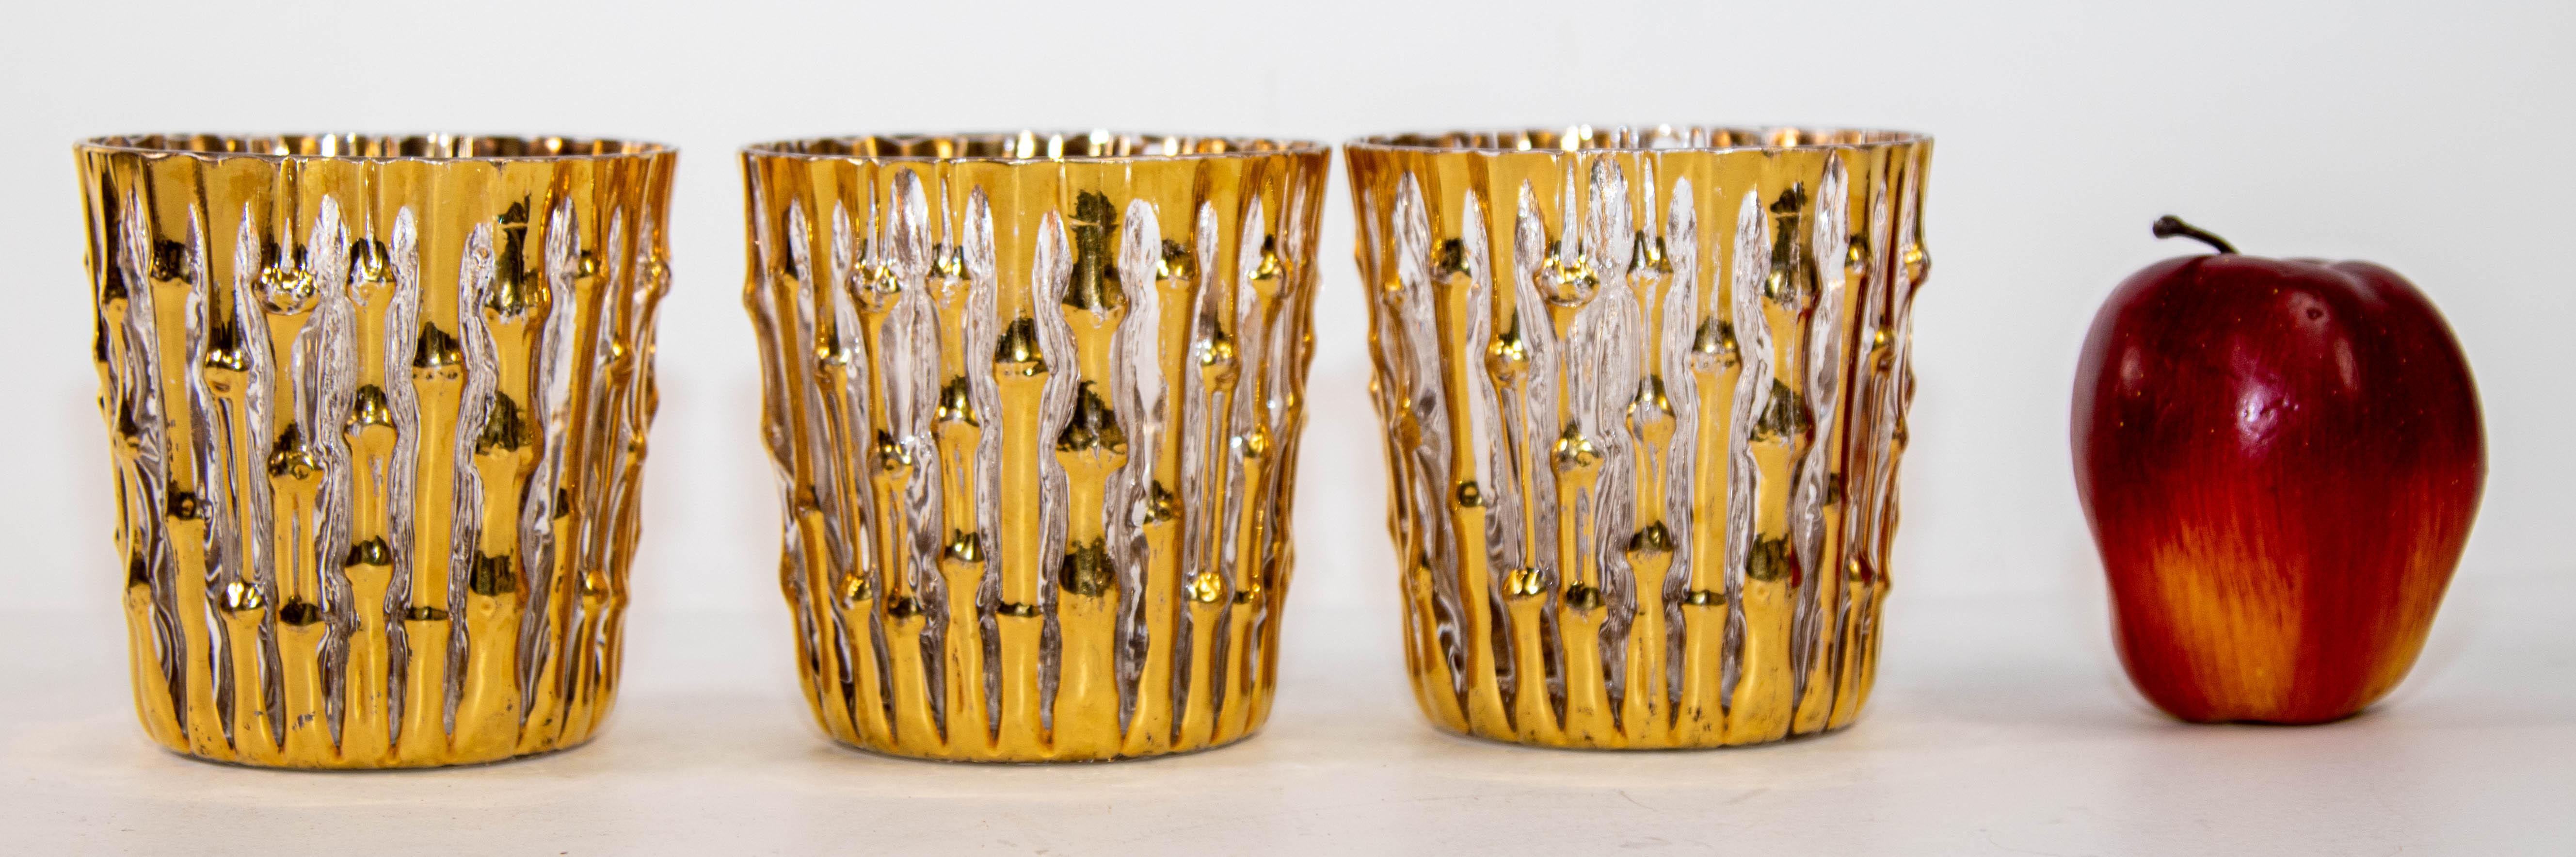 1960s Hand Painted 22-Karat Bamboo Rocks Glasses, Set of 3 Old Fashioned Barware For Sale 5